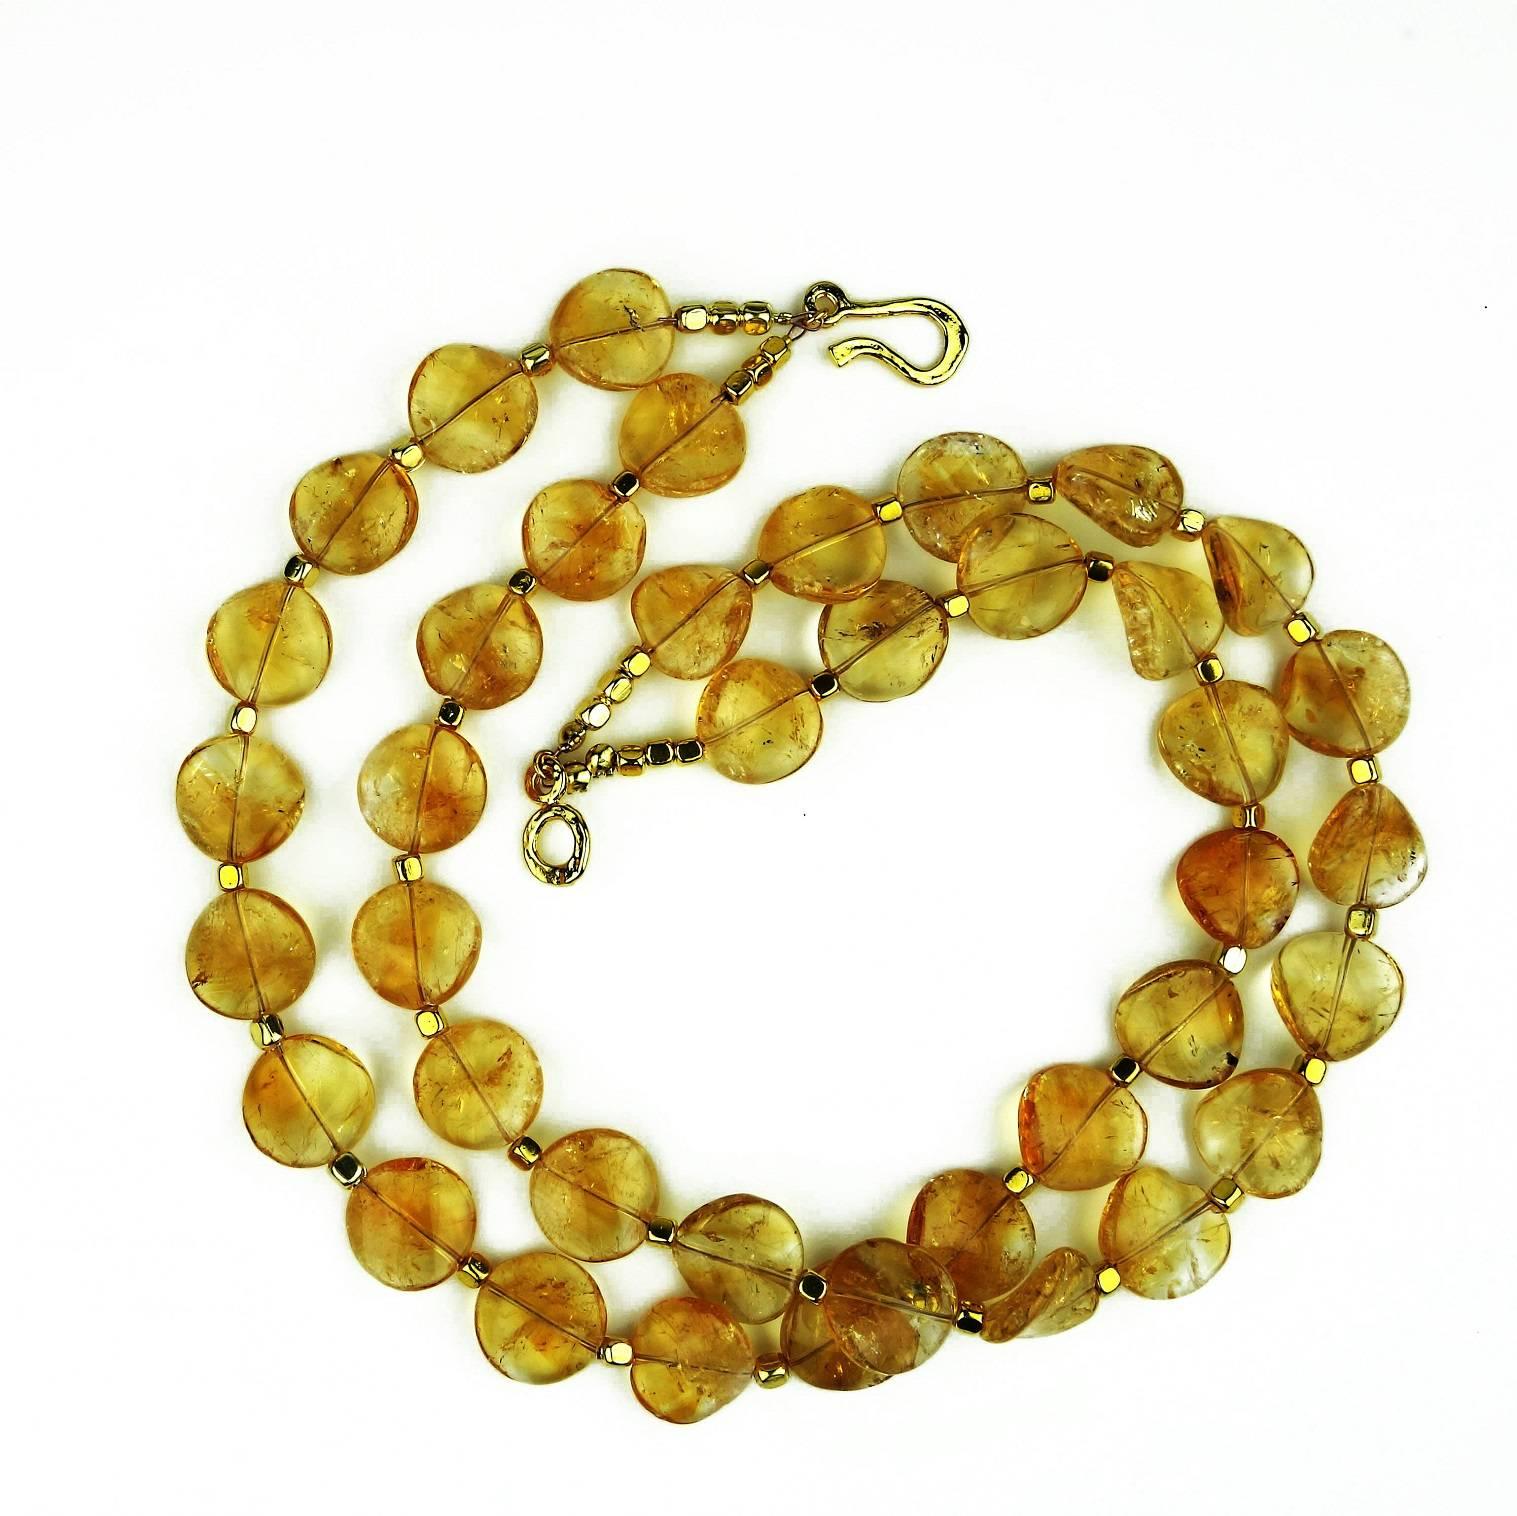 Women's Glowing Citrine Double Strand Necklace